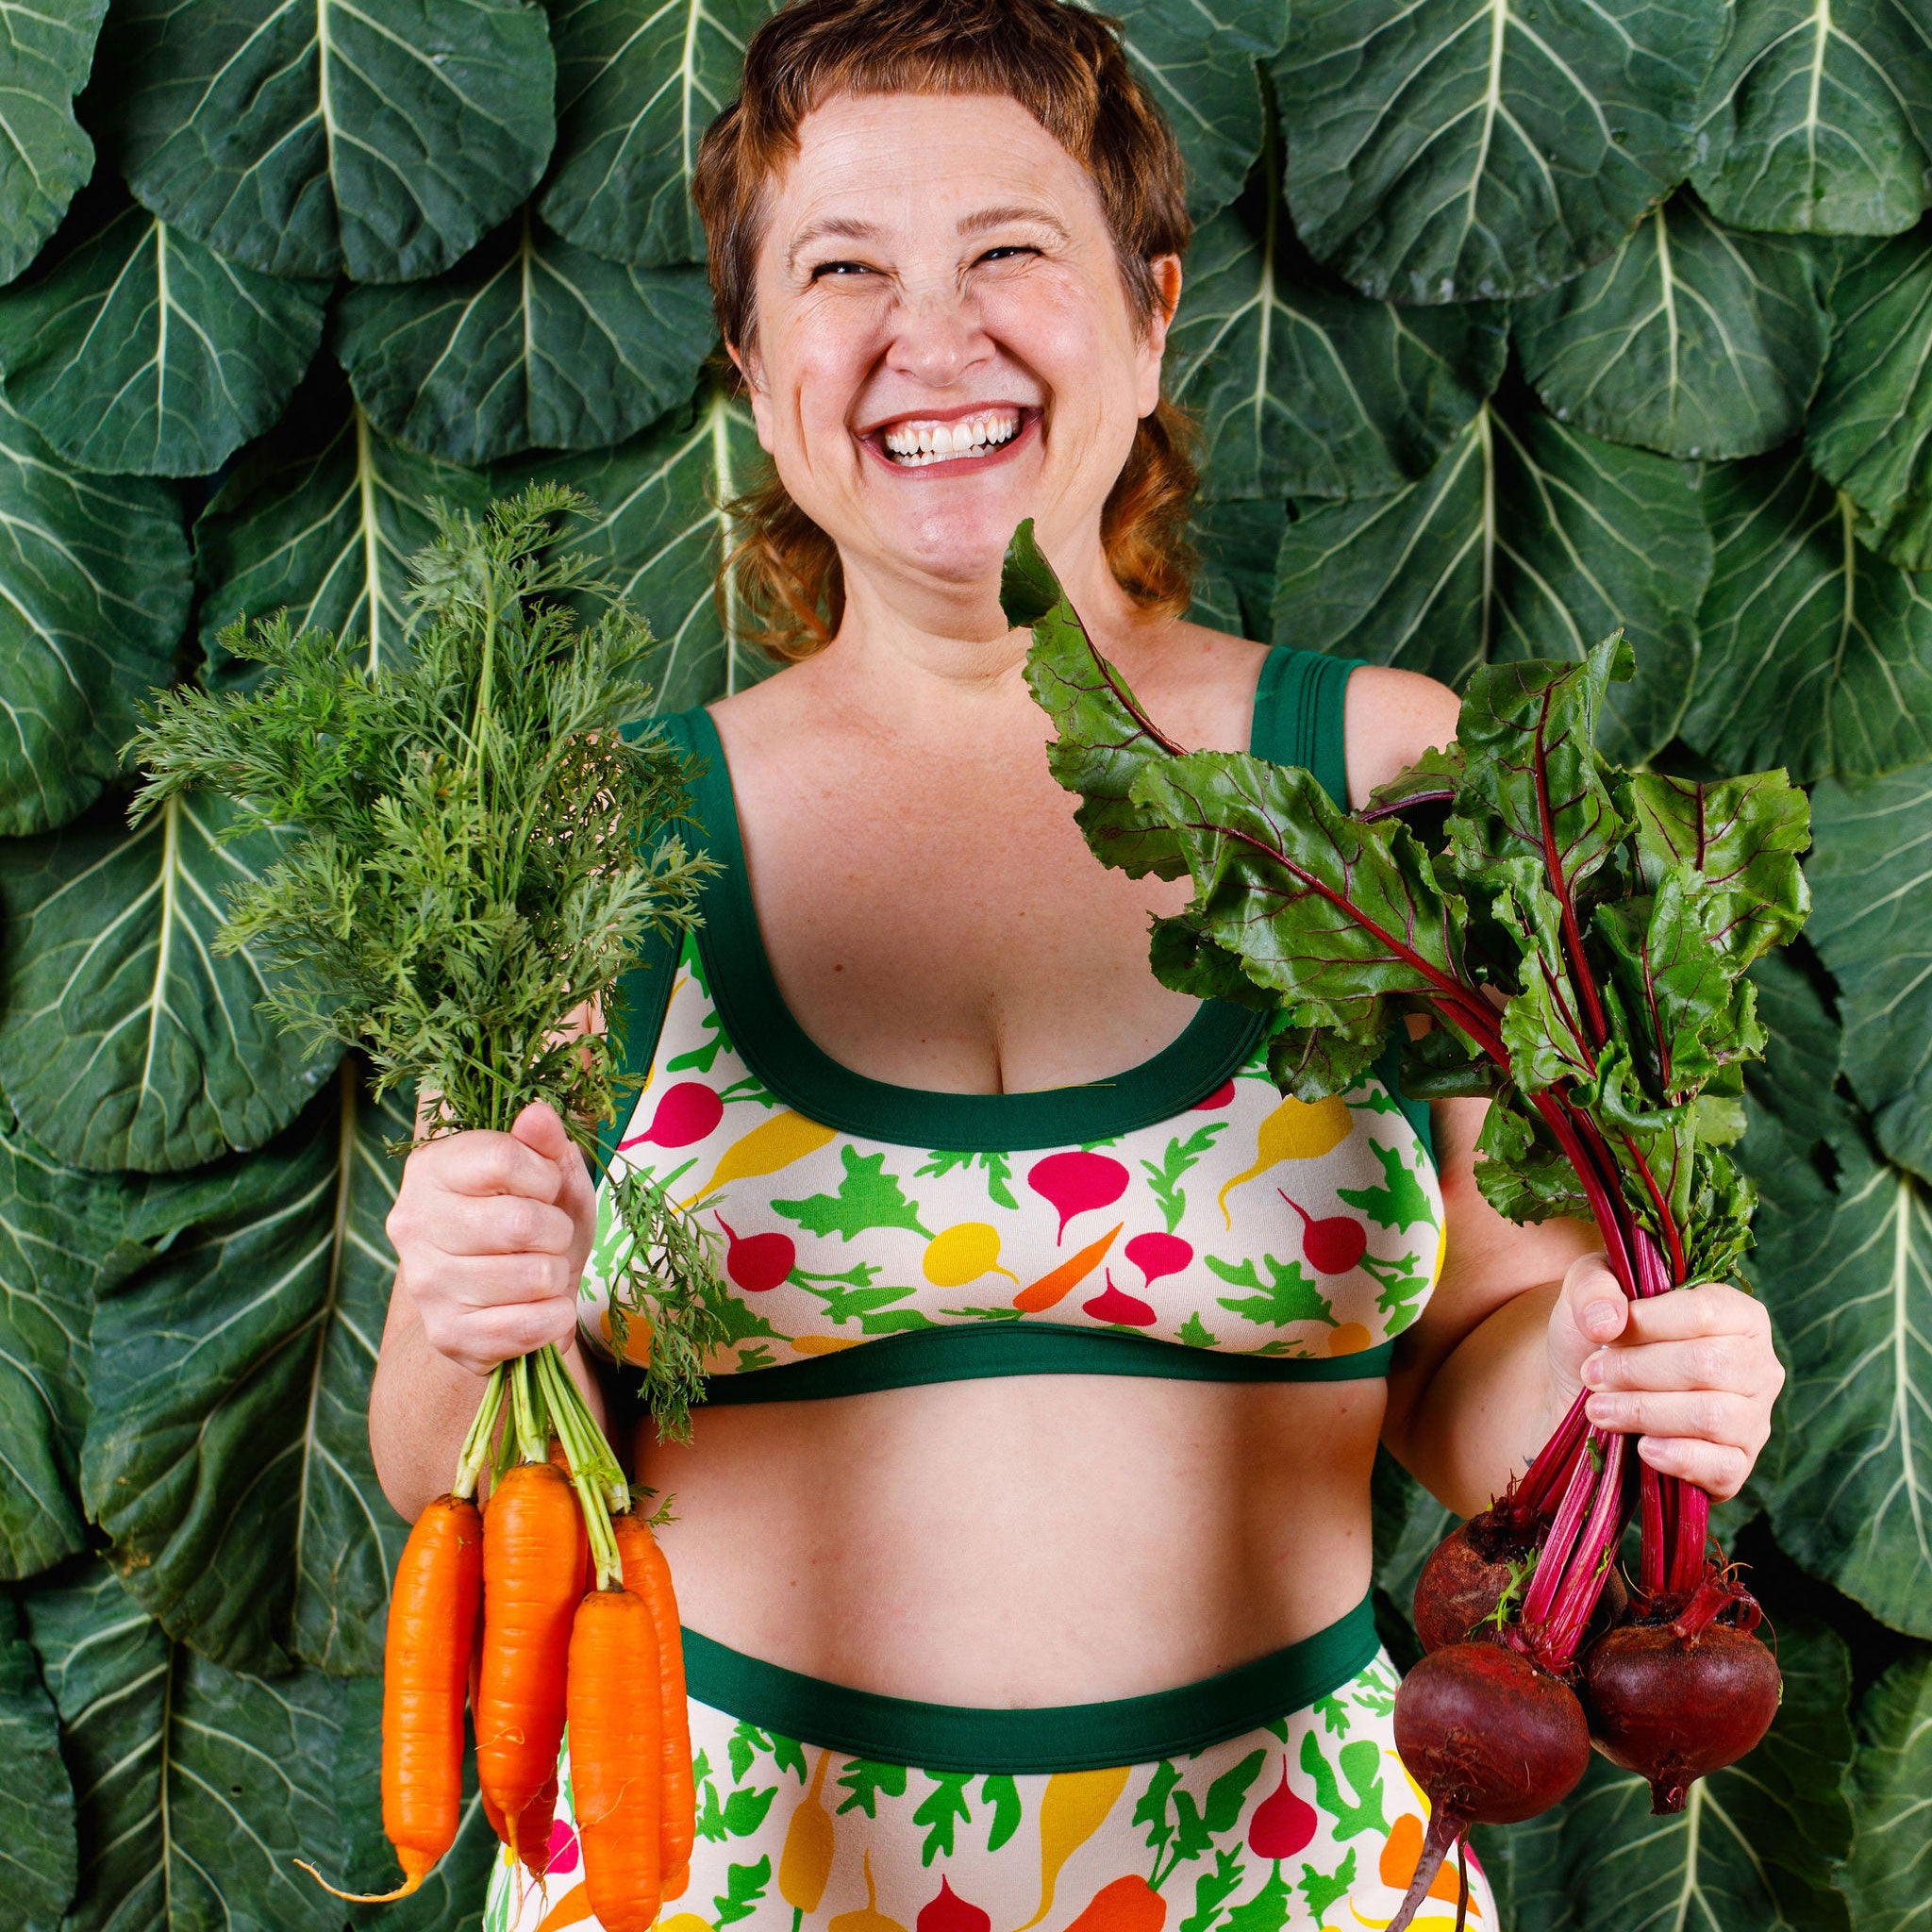 Model holding beets and carrots and smiling wearing Thunderants Sky Rise style underwear and matching Bralette in Root Veggies print - yellow, orange, pink, and green vegetables.